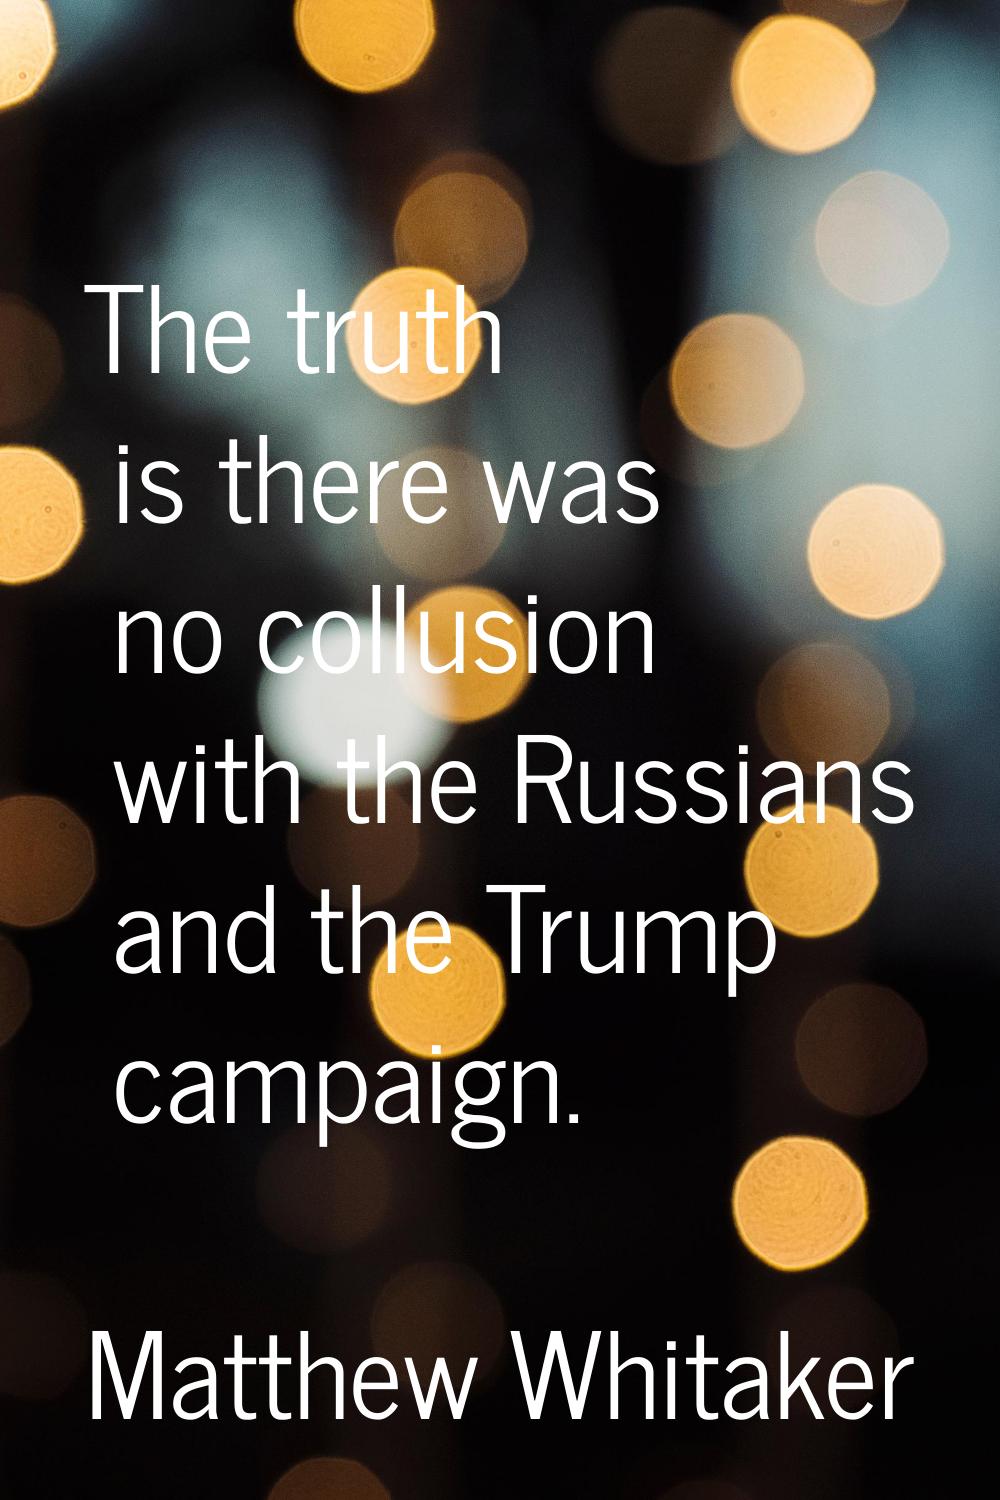 The truth is there was no collusion with the Russians and the Trump campaign.